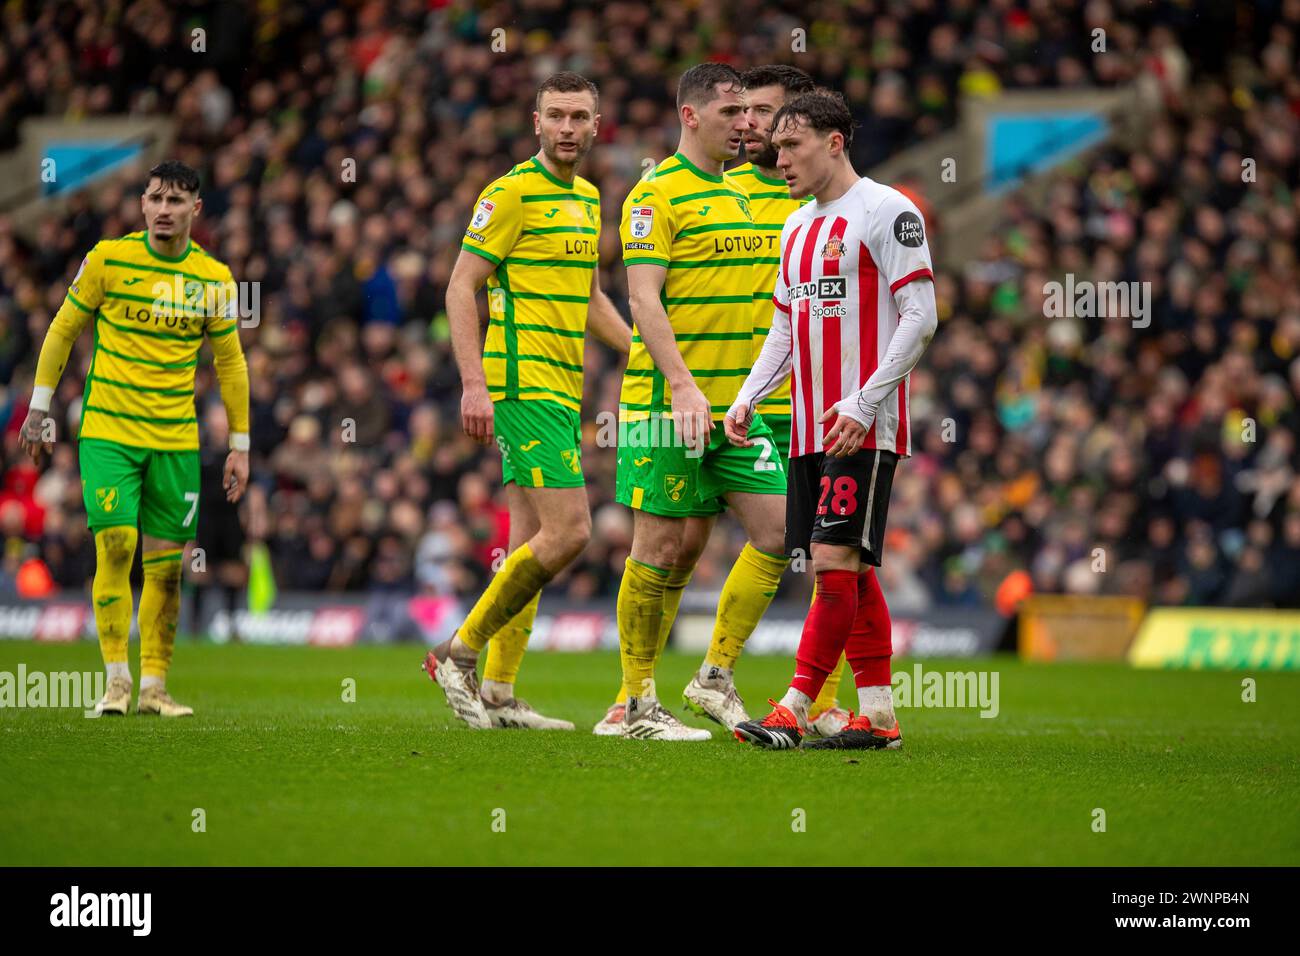 Callum Styles of Sunderland waits for a corner with Ben Gibson of Norwich City, Grant Hanley of Norwich City and Kenny McLean of Norwich City during the Sky Bet Championship match between Norwich City and Sunderland at Carrow Road, Norwich on Saturday 2nd March 2024. (Photo: David Watts | MI News) Credit: MI News & Sport /Alamy Live News Stock Photo